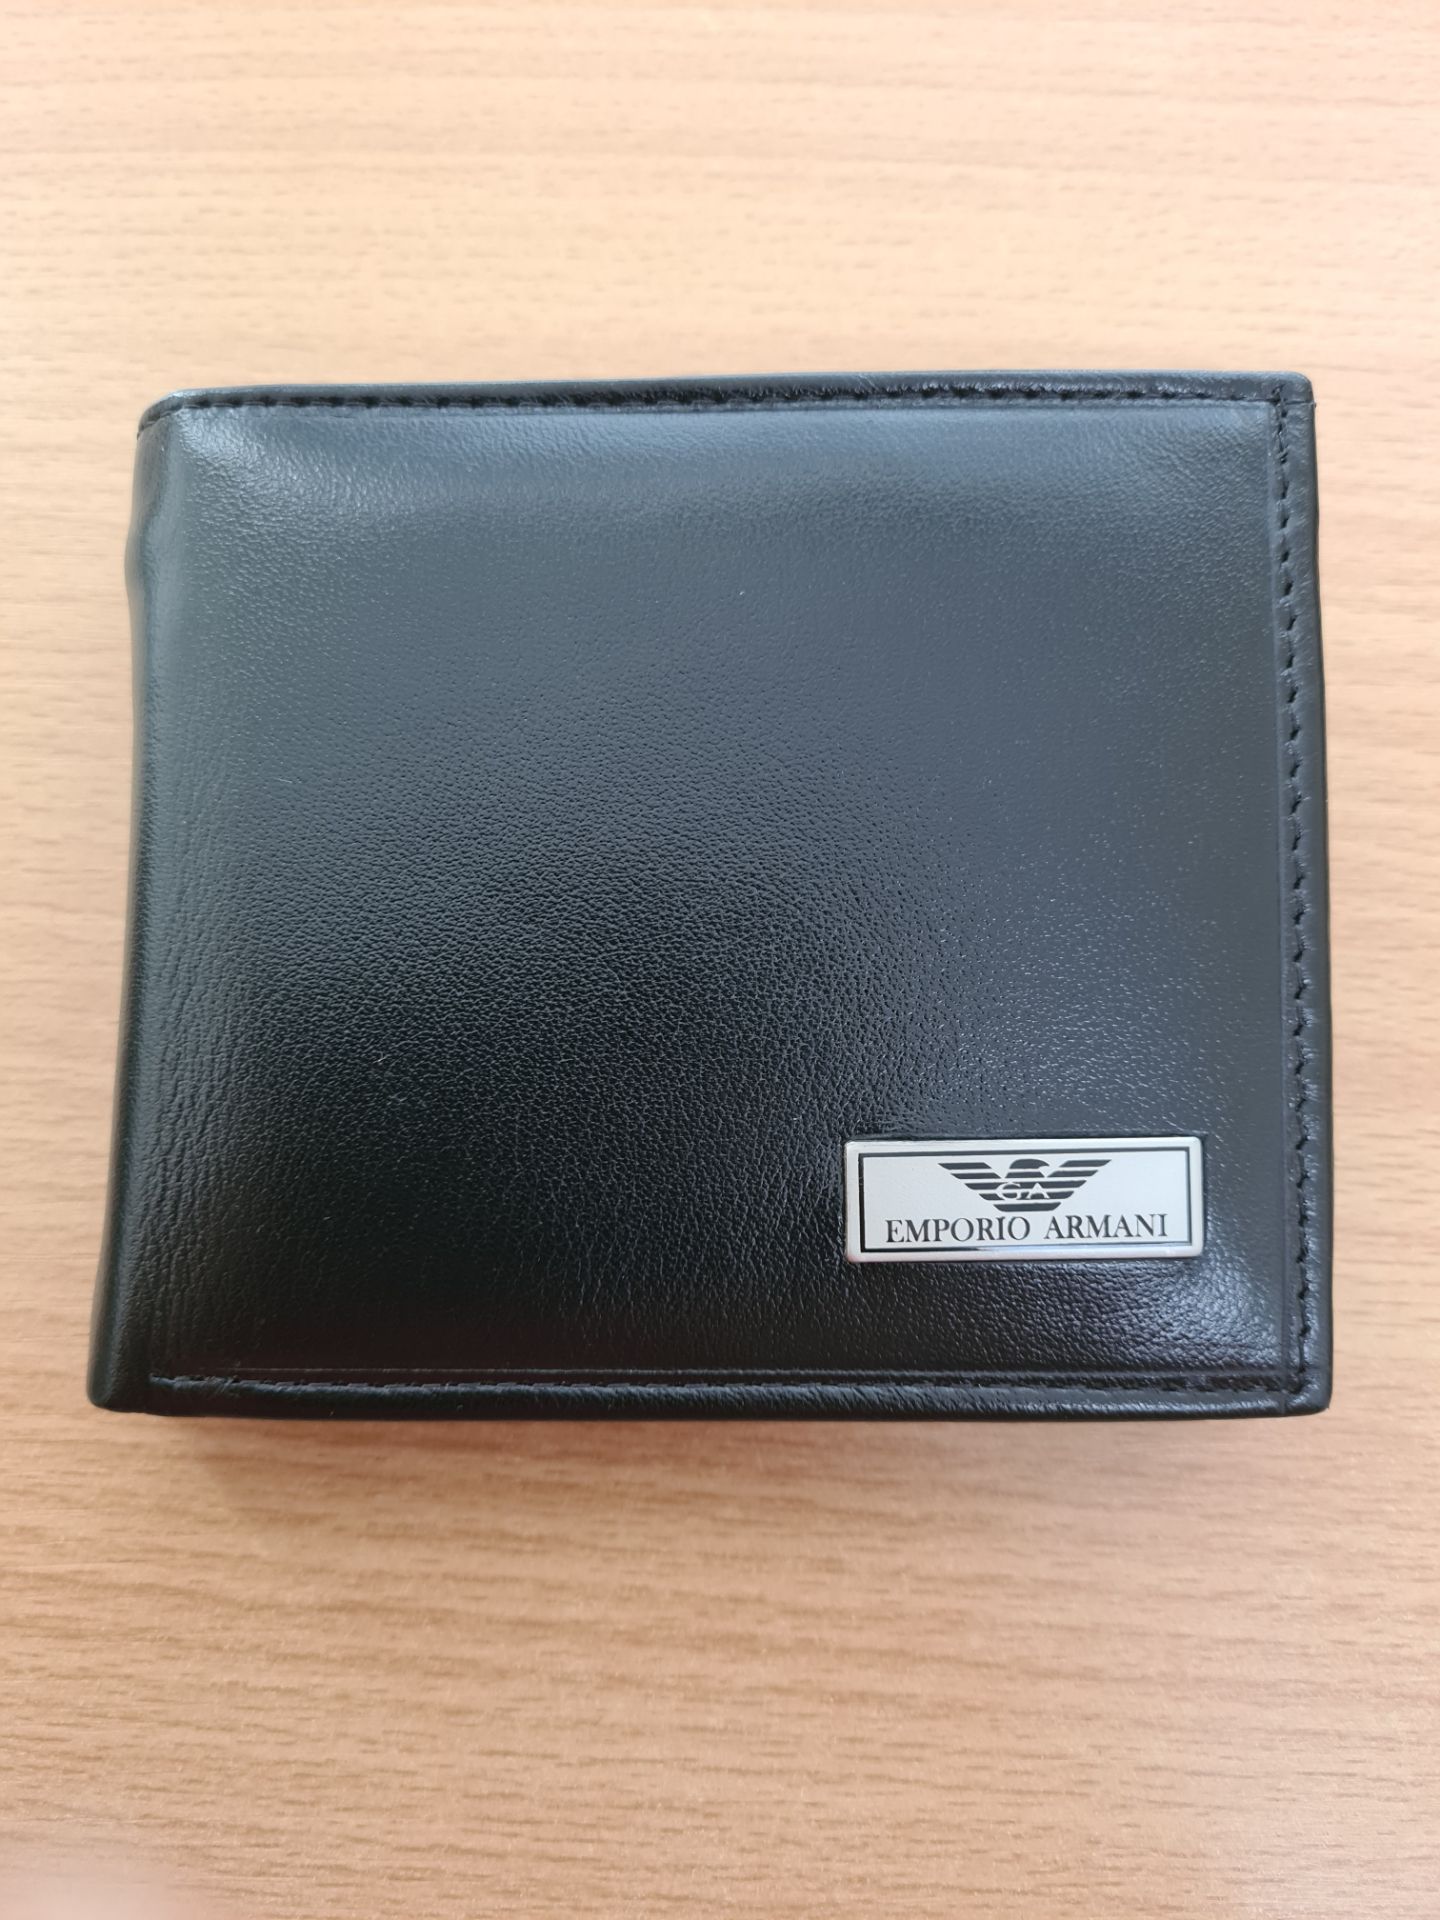 emporio armani men's leather wallet - new with box